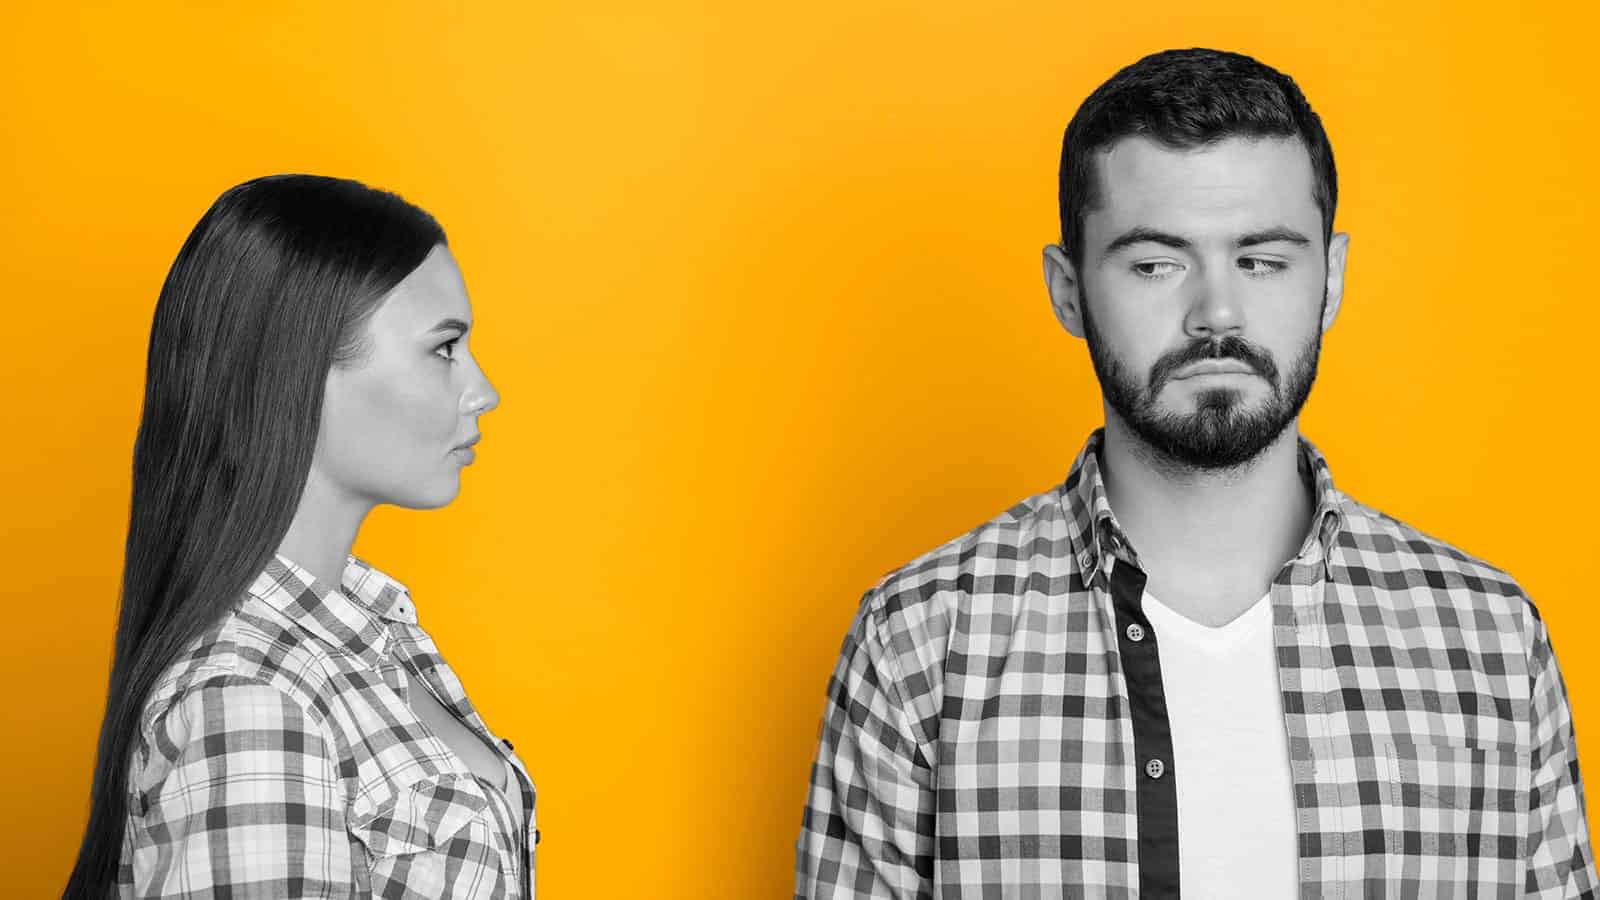 Psychology Explains What Eye Contact Says About Your Personality